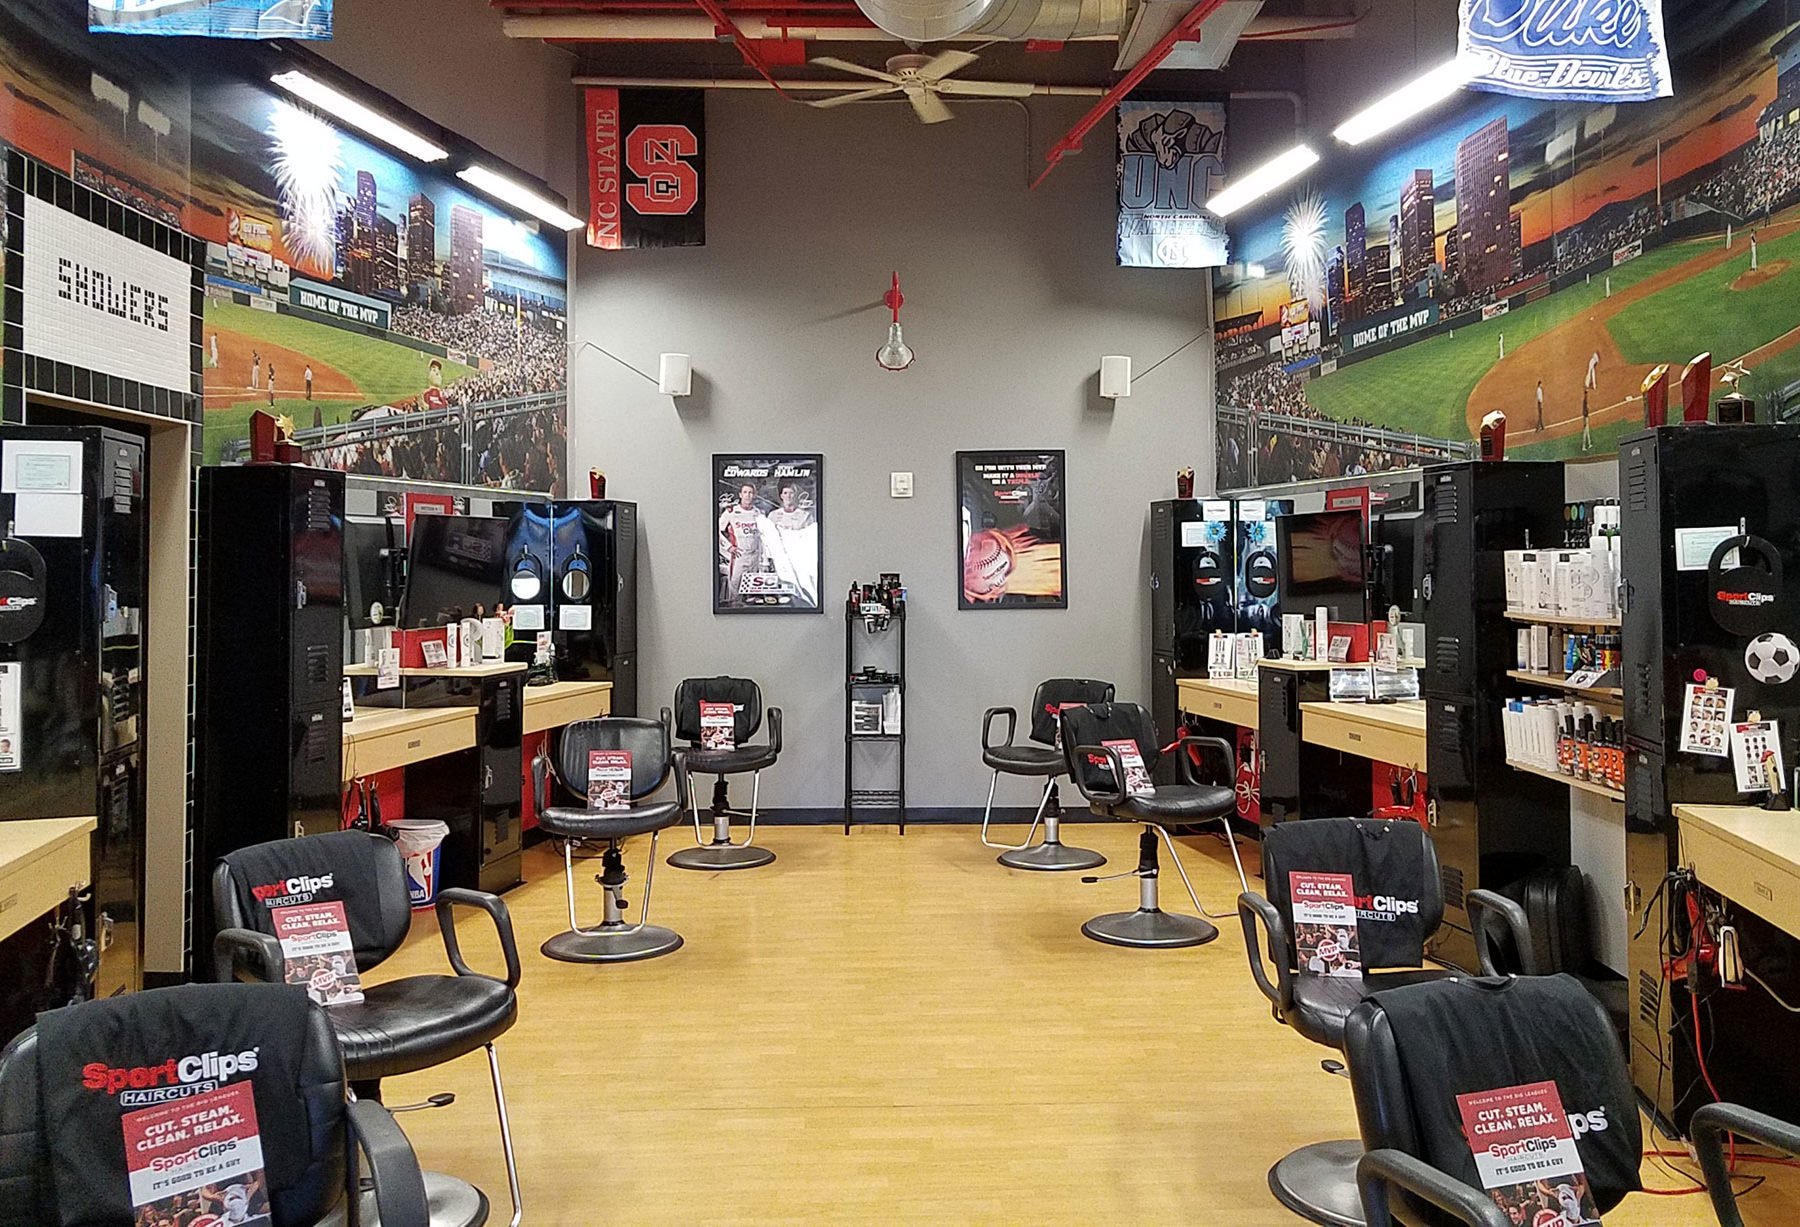 Budget-Friendly Grooming: How to Find Deals on Sports Clips Prices